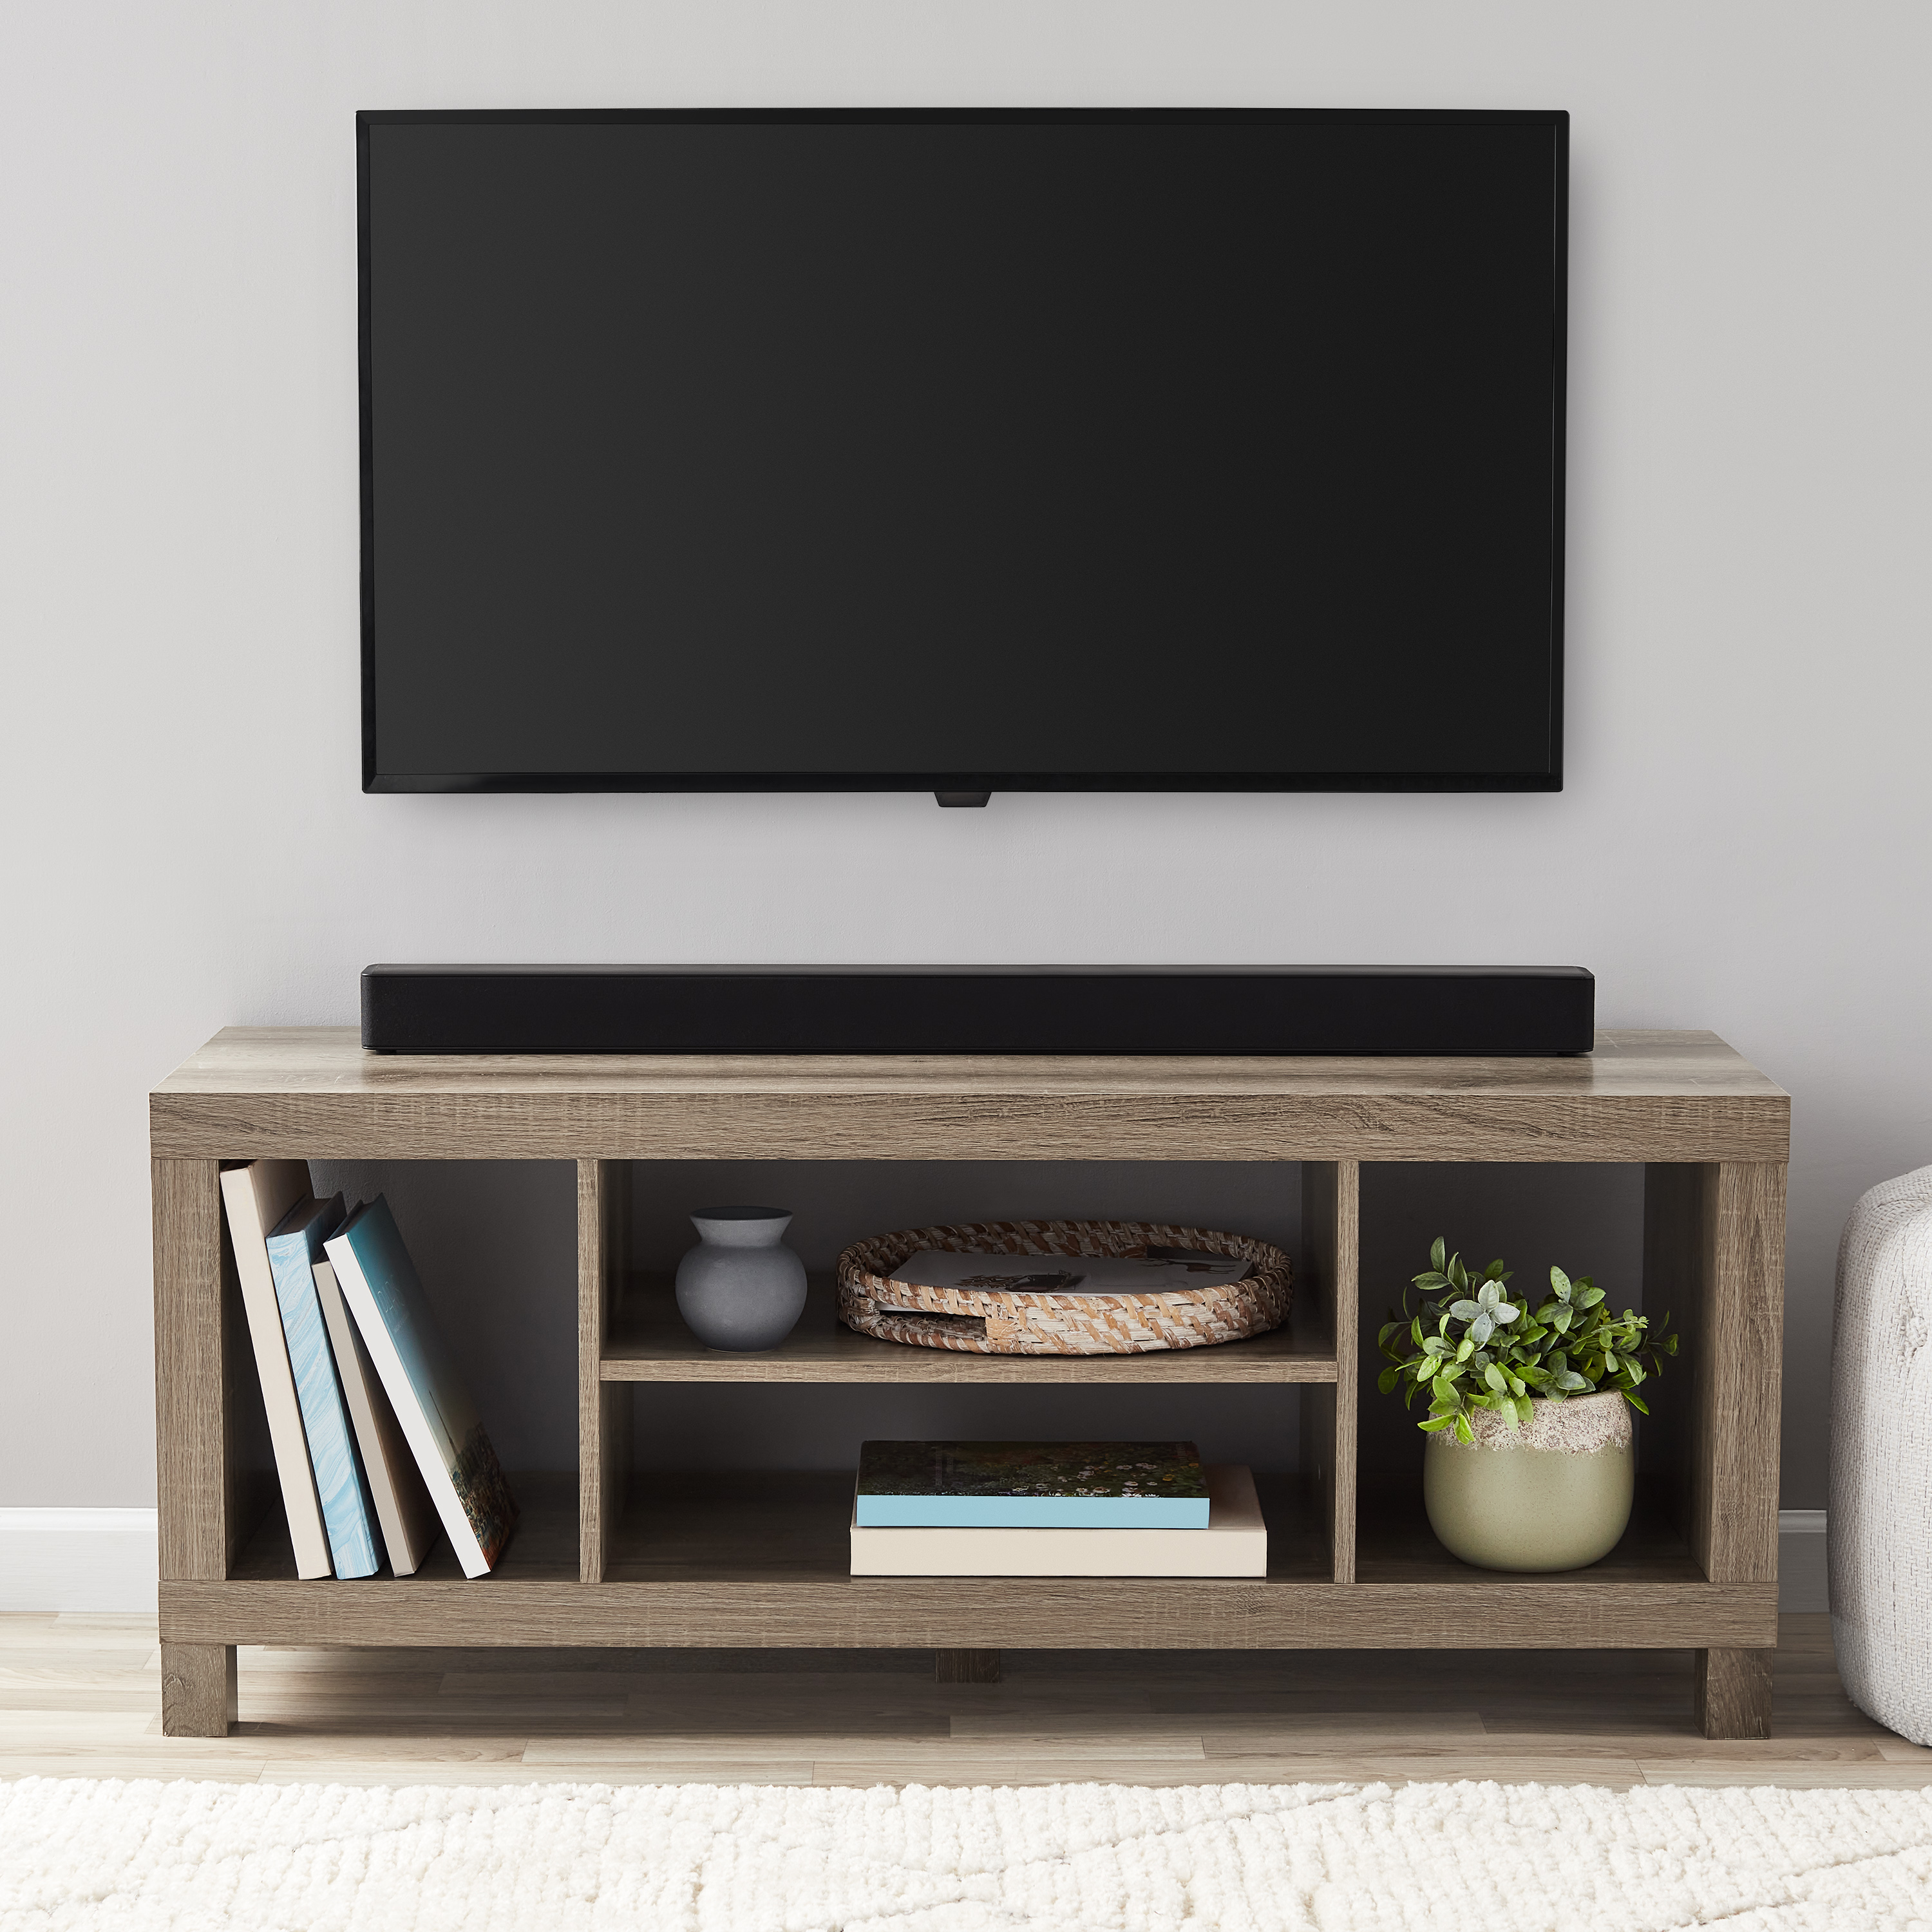 Mainstays TV Stand for TVs up to 42", Rustic Oak - image 1 of 6